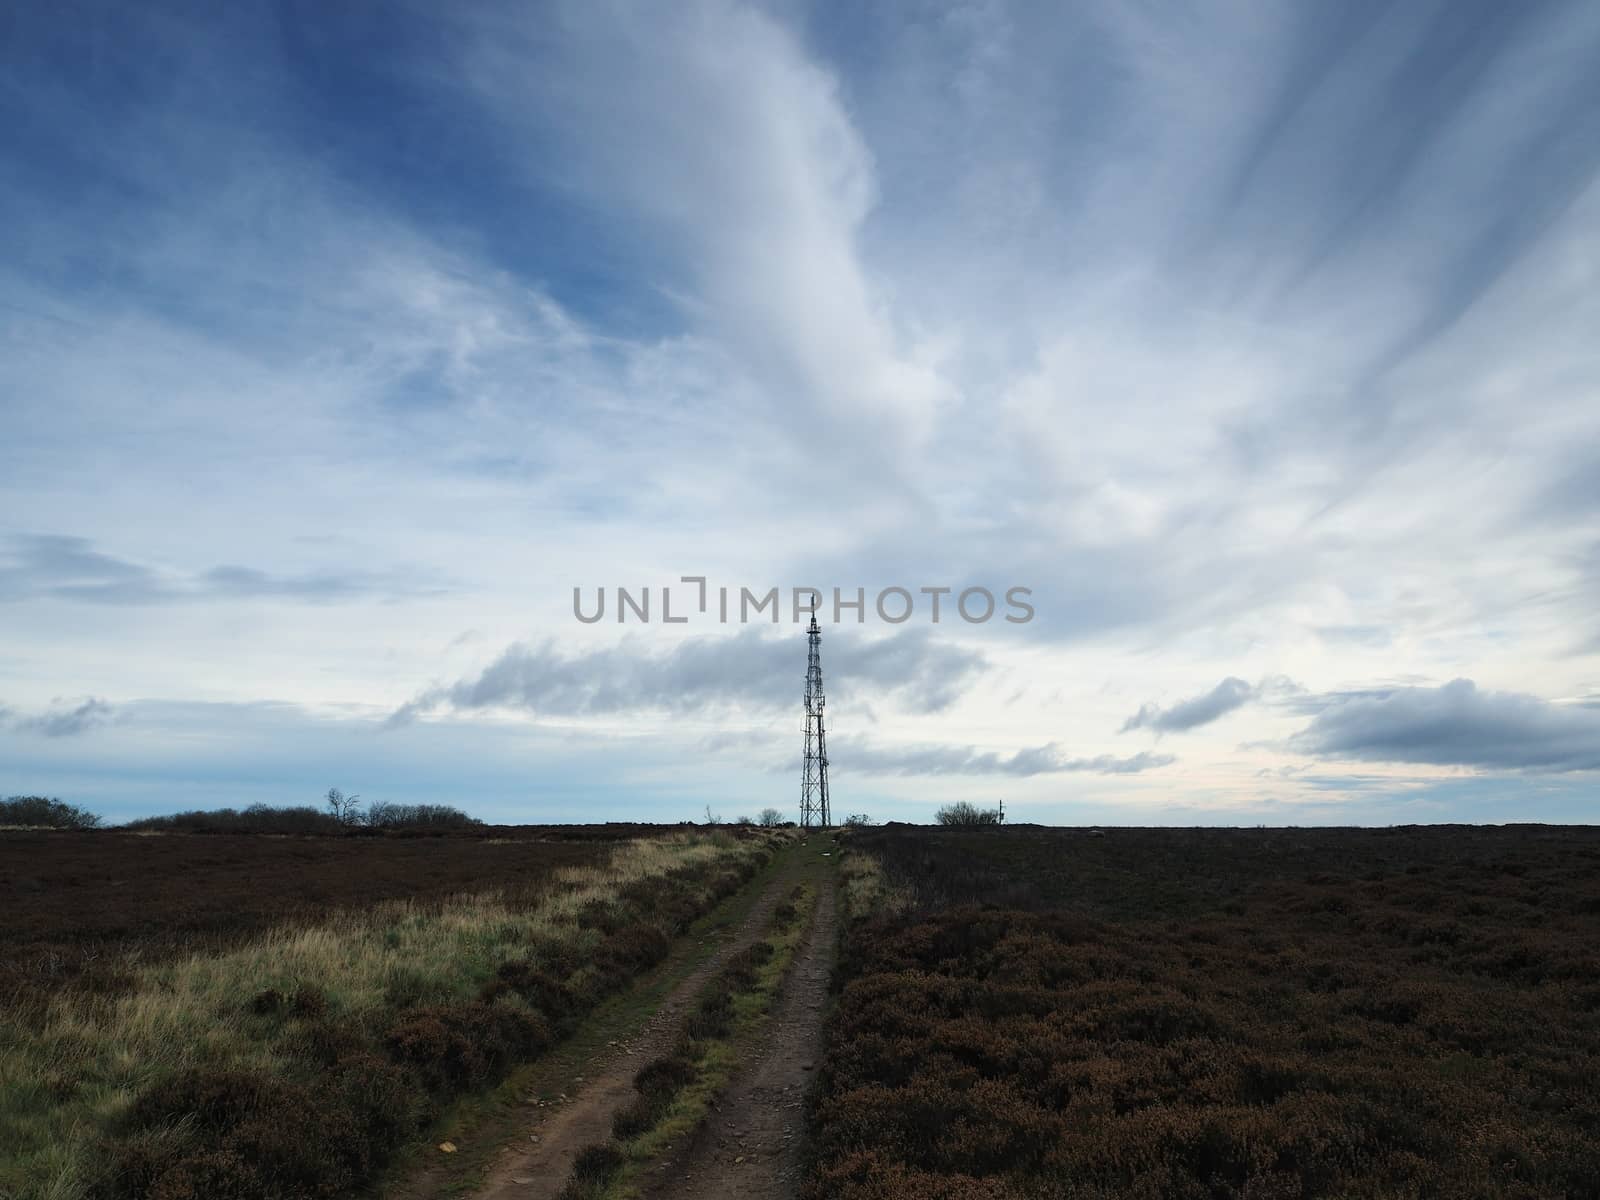 Transmitter mast viewed from Howdale Moor under brooding sky in the North York Moors National Park, Yorkshire, UK